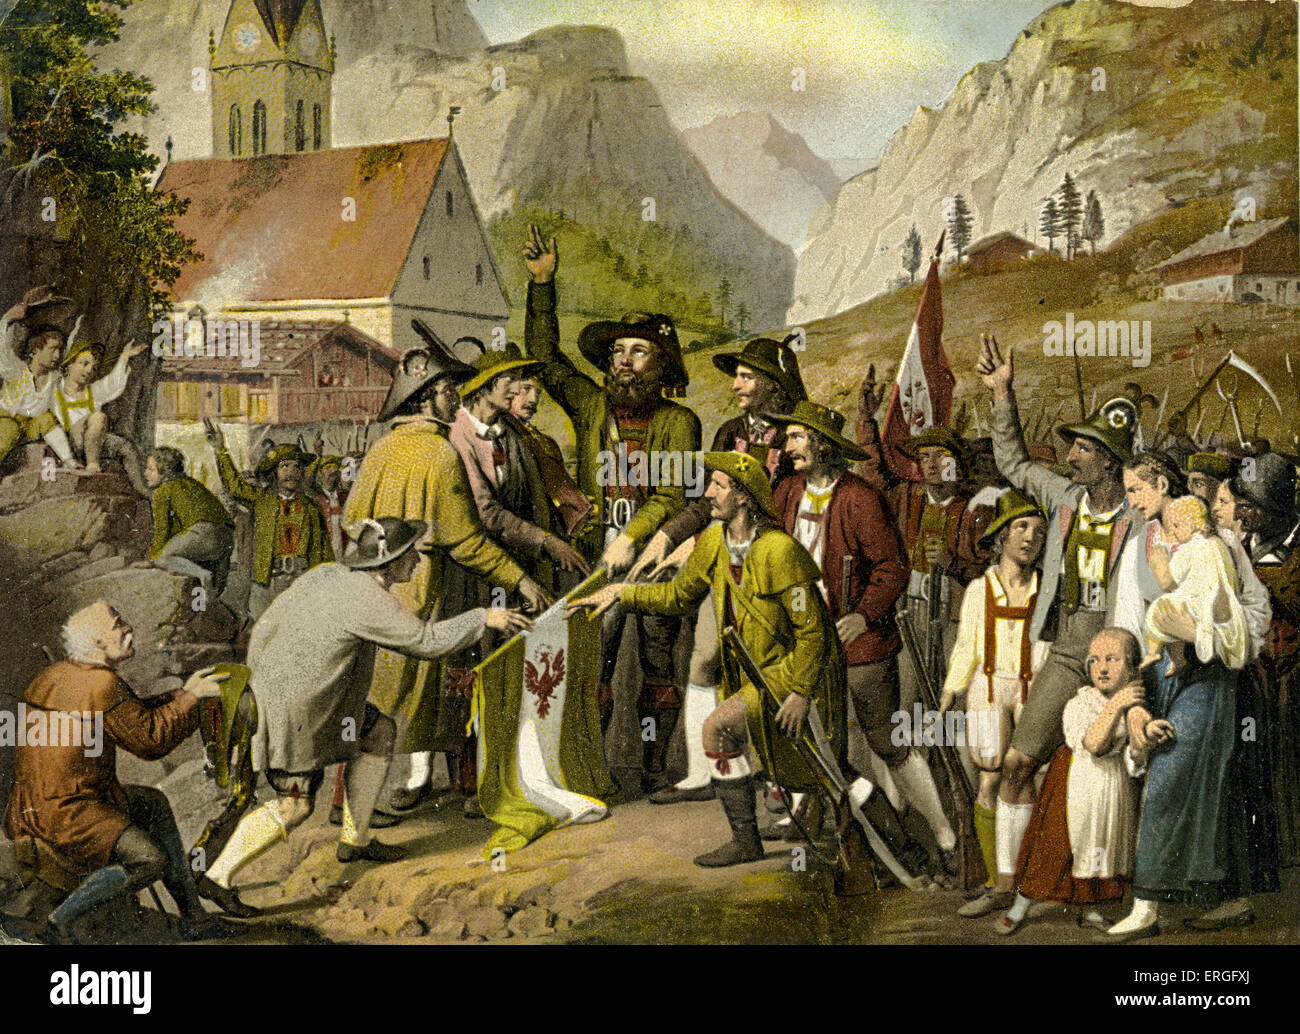 Fight for Tyrolean Independence against Bavarian rule and Napoleon - Andreas Hofer making an oath. From painting of 1809. Stock Photo